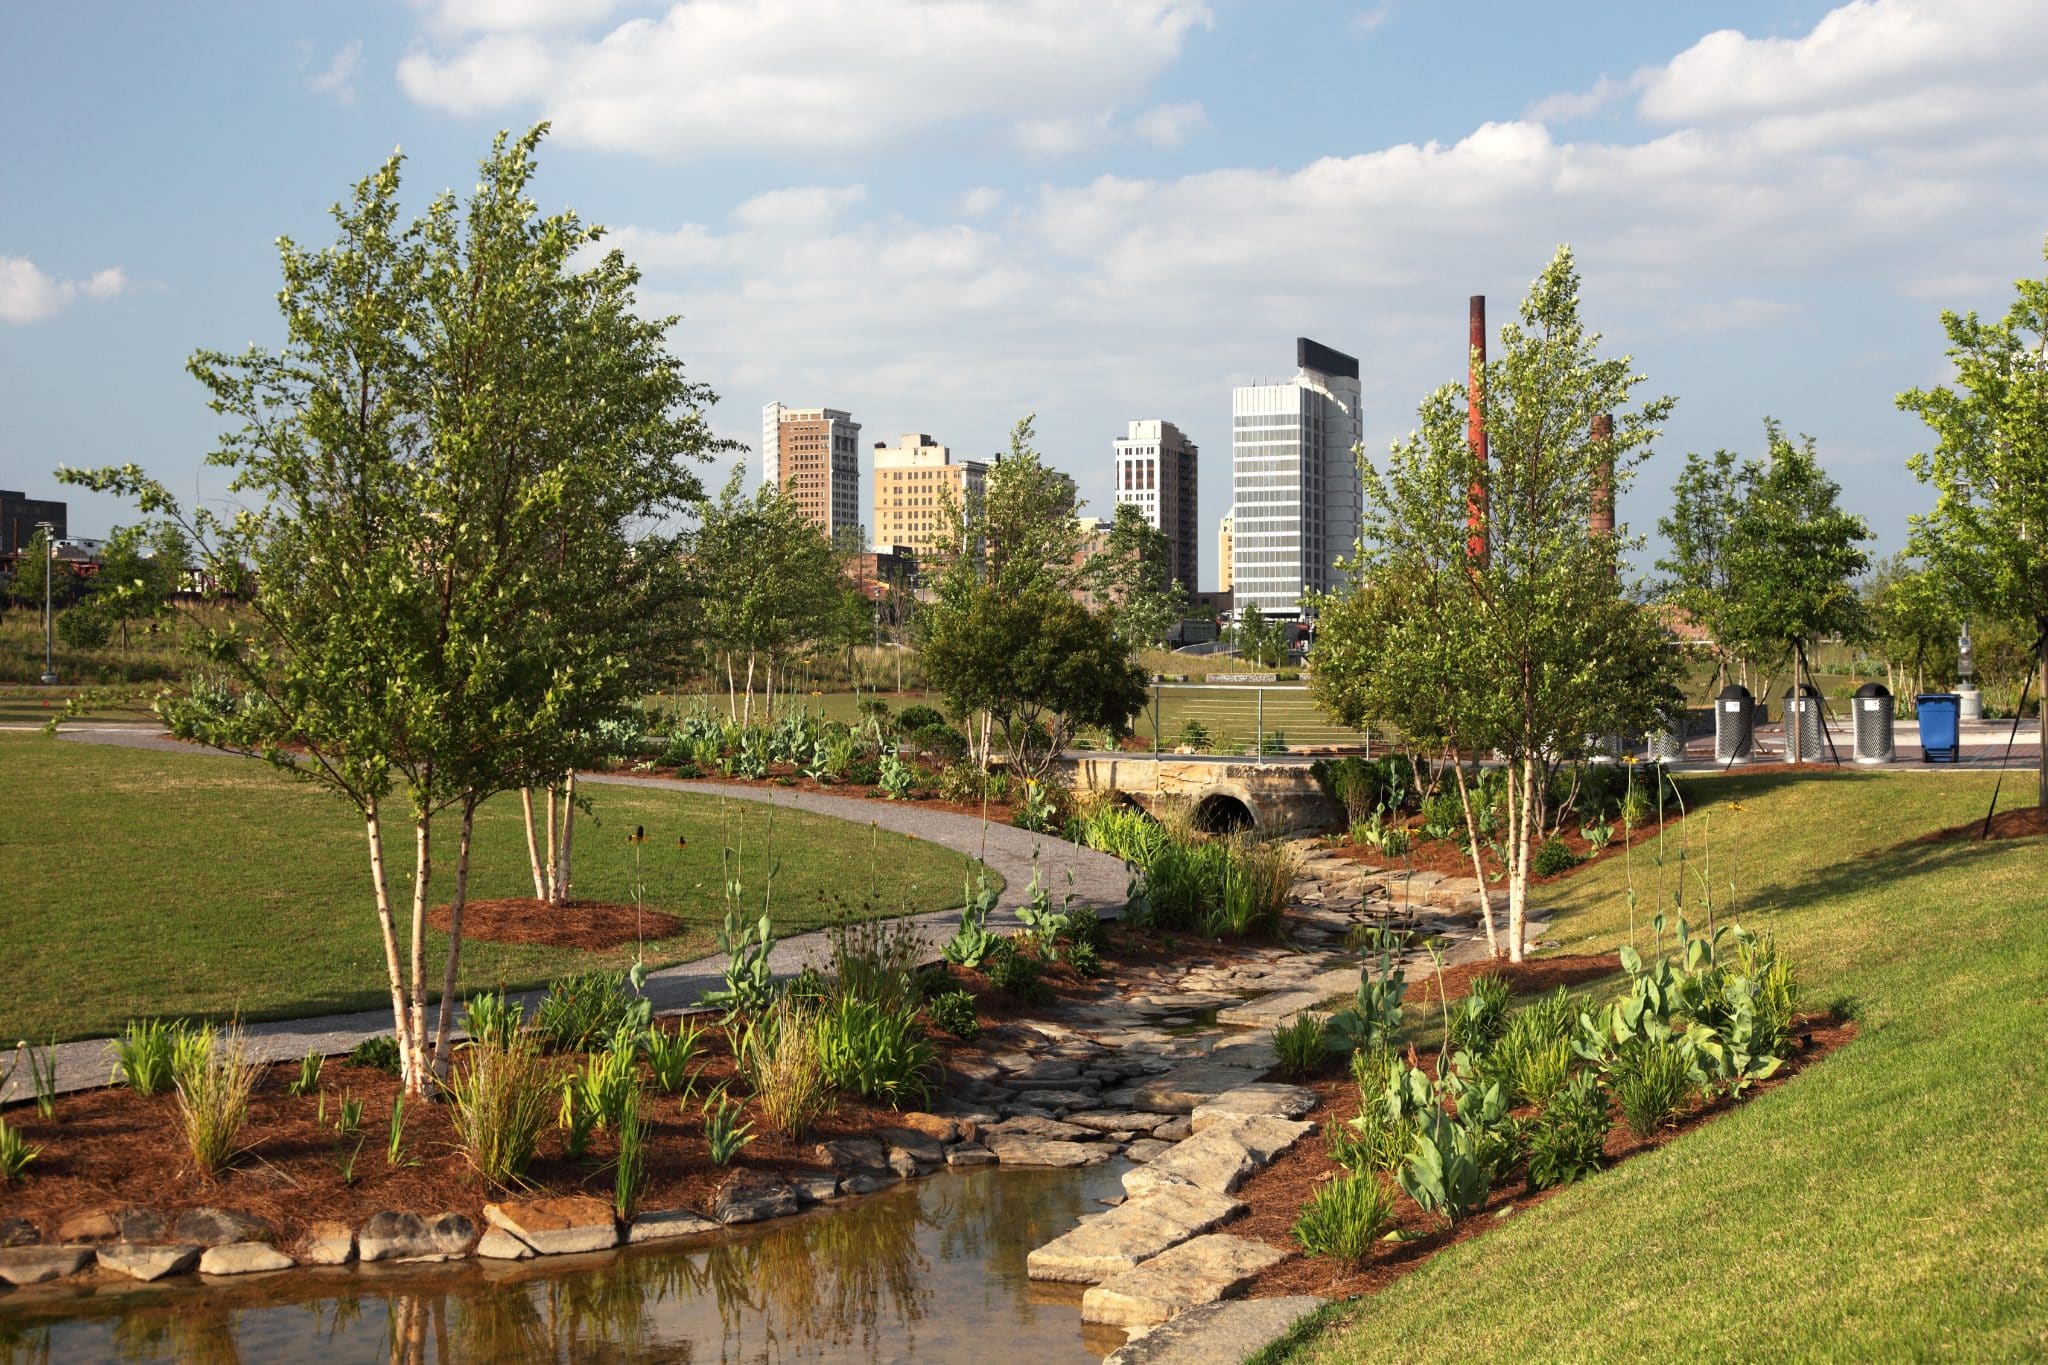 Railroad Park in Birmingham offers many opportunities for family fun